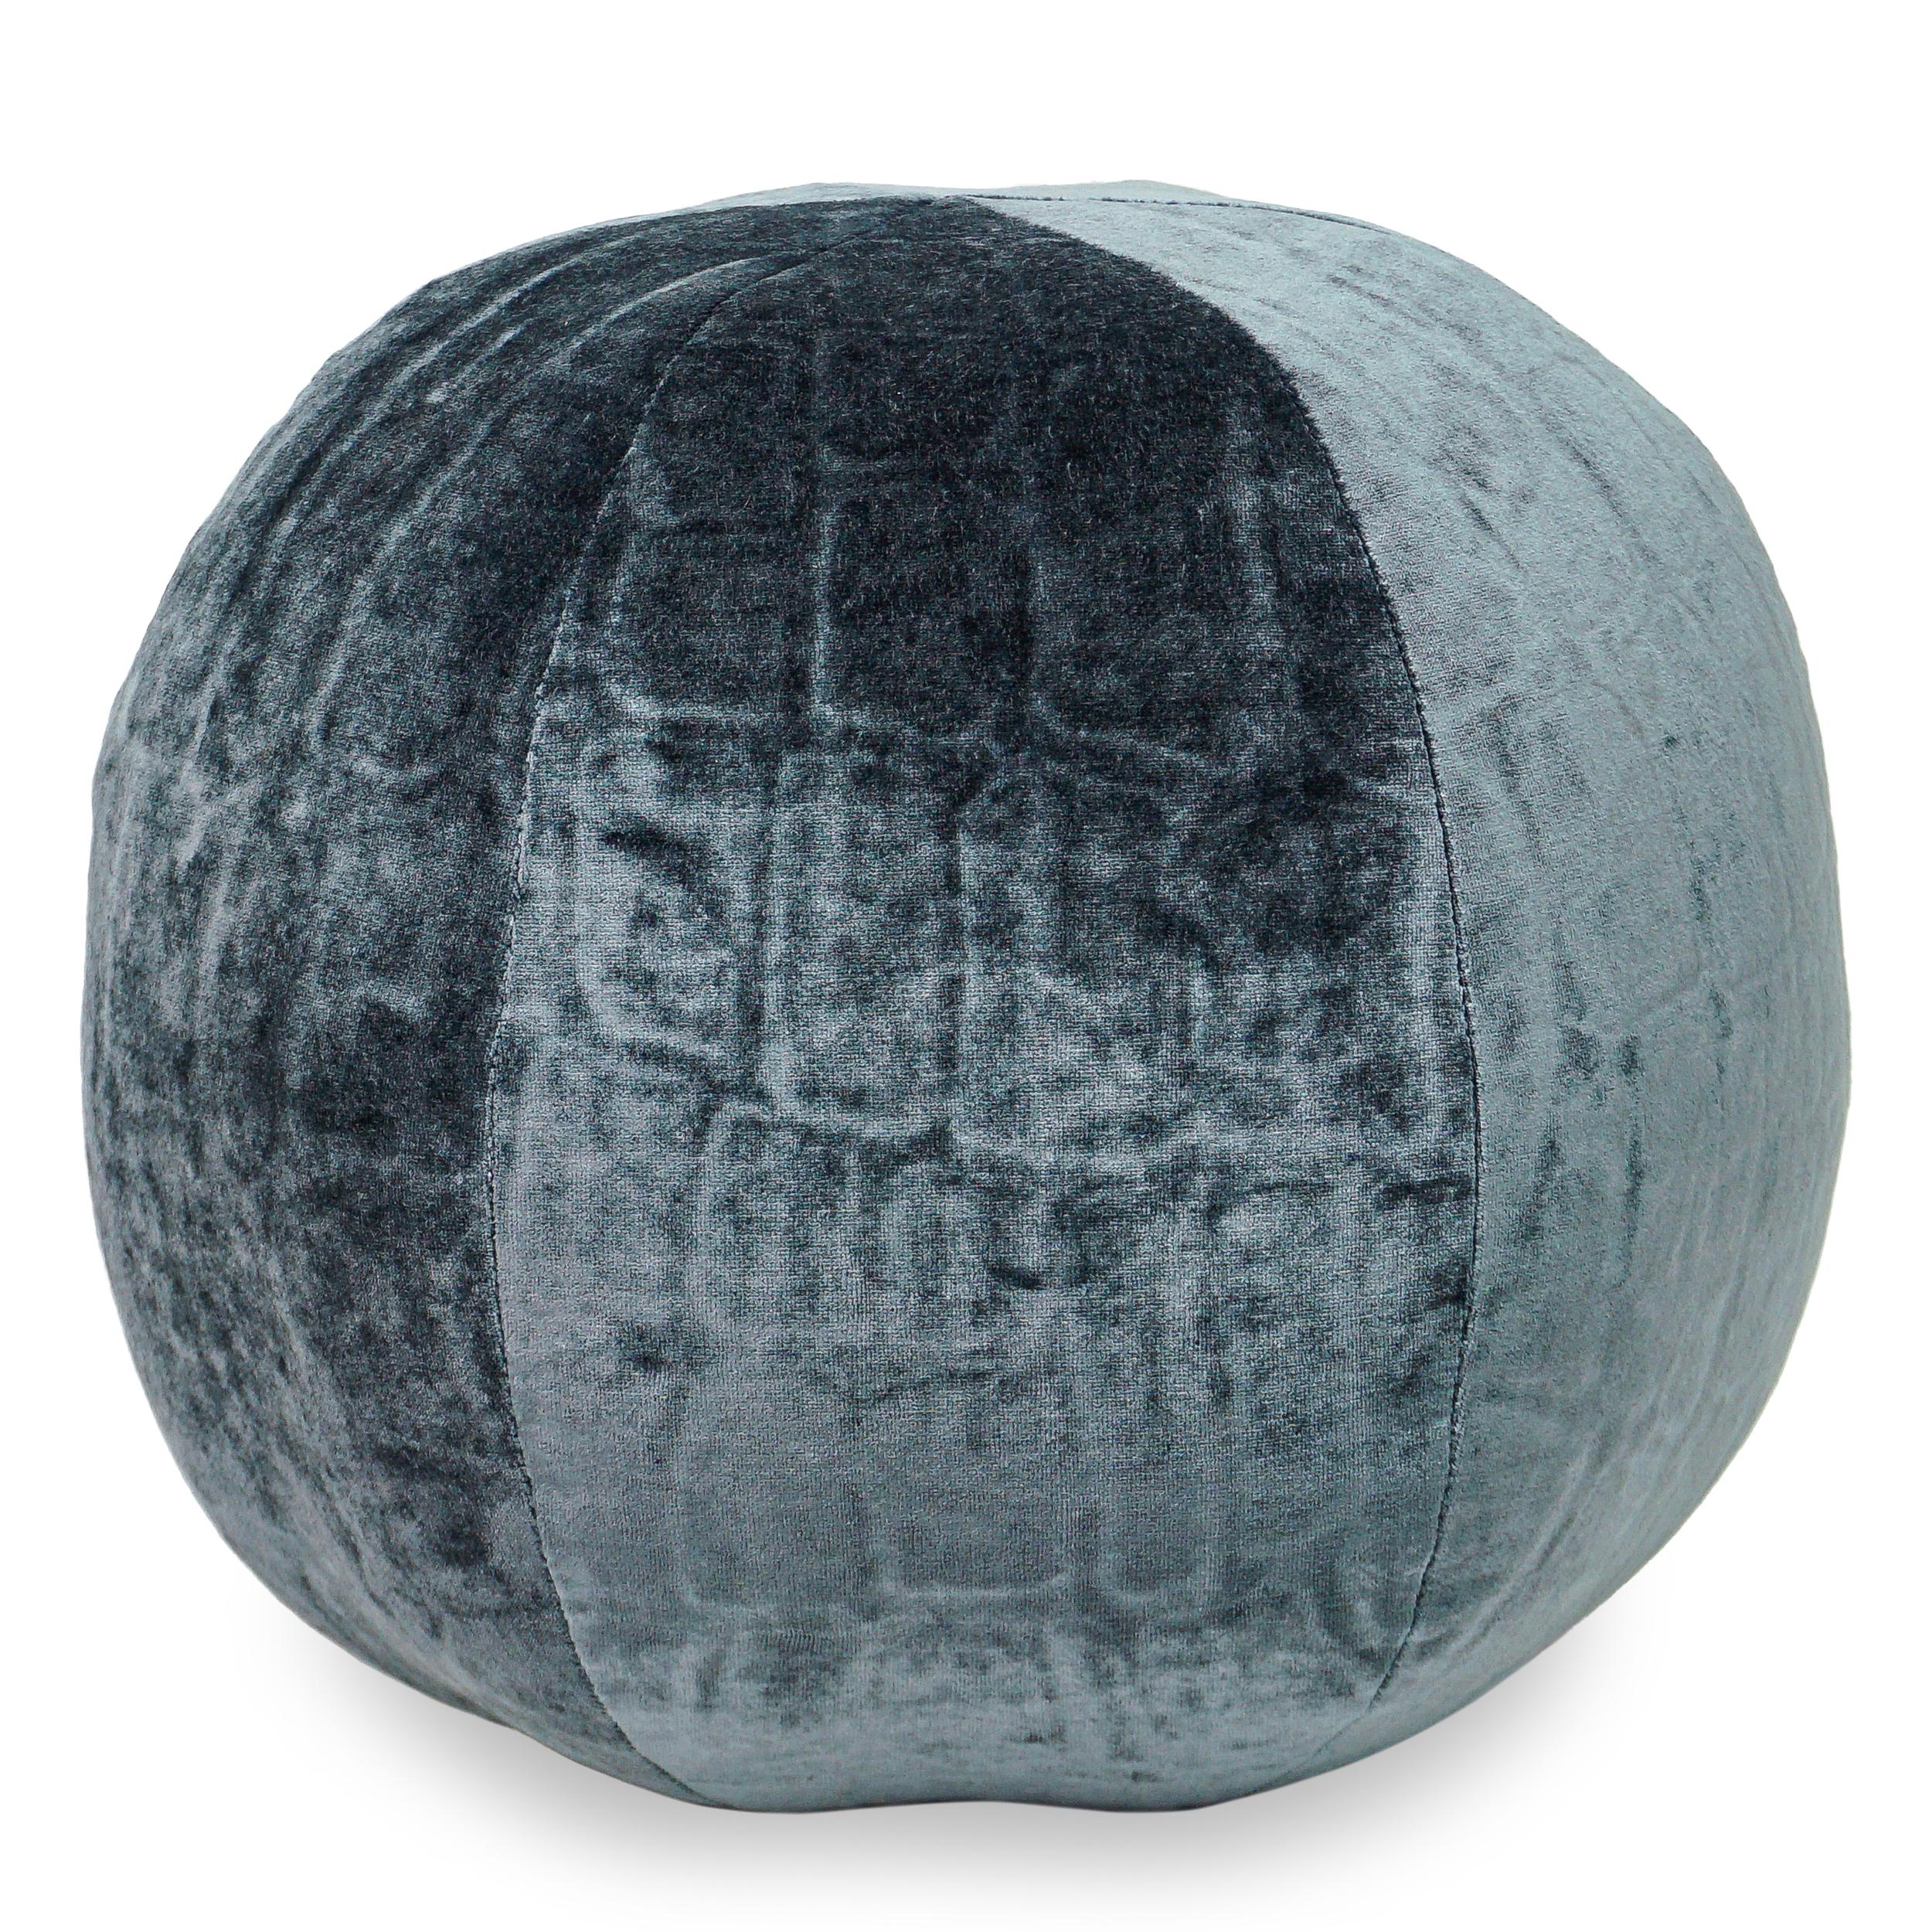 Gator embossed velvet ball pillow. Ask about other colors.

Measurements:
Outside: 12” diameter x 12” height

Price as shown: $625 each
COM Price: $240 each
Customization may change price.

How We Work:
Made to order by Connecticut-based